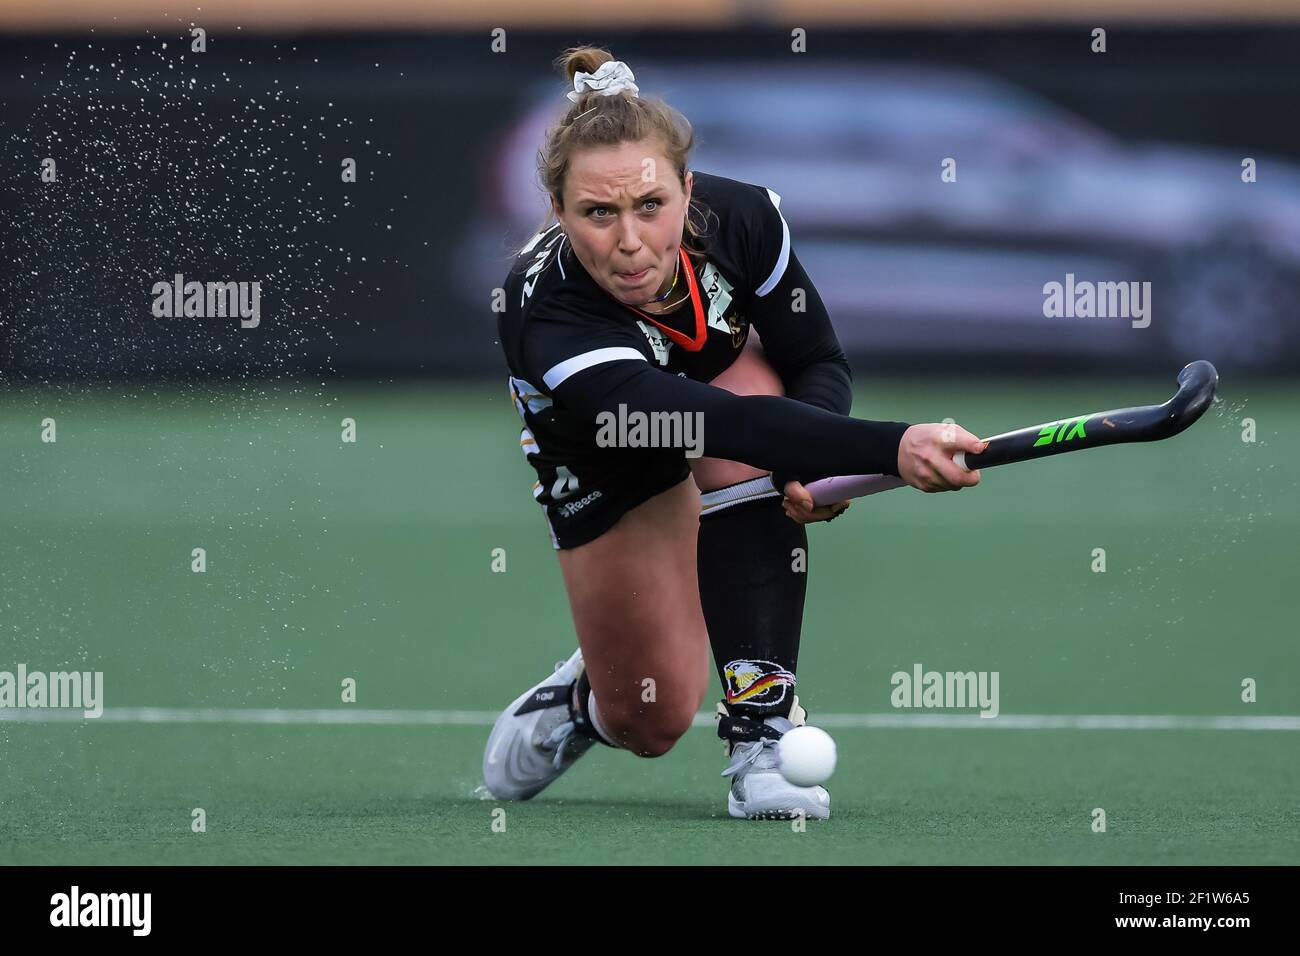 AMSTELVEEN, NETHERLANDS - MARCH 6: Nike Lorenz of Germany during the FIH Pro League match between Netherlands Women and Germany Women at Wagener Stadi Stock Photo